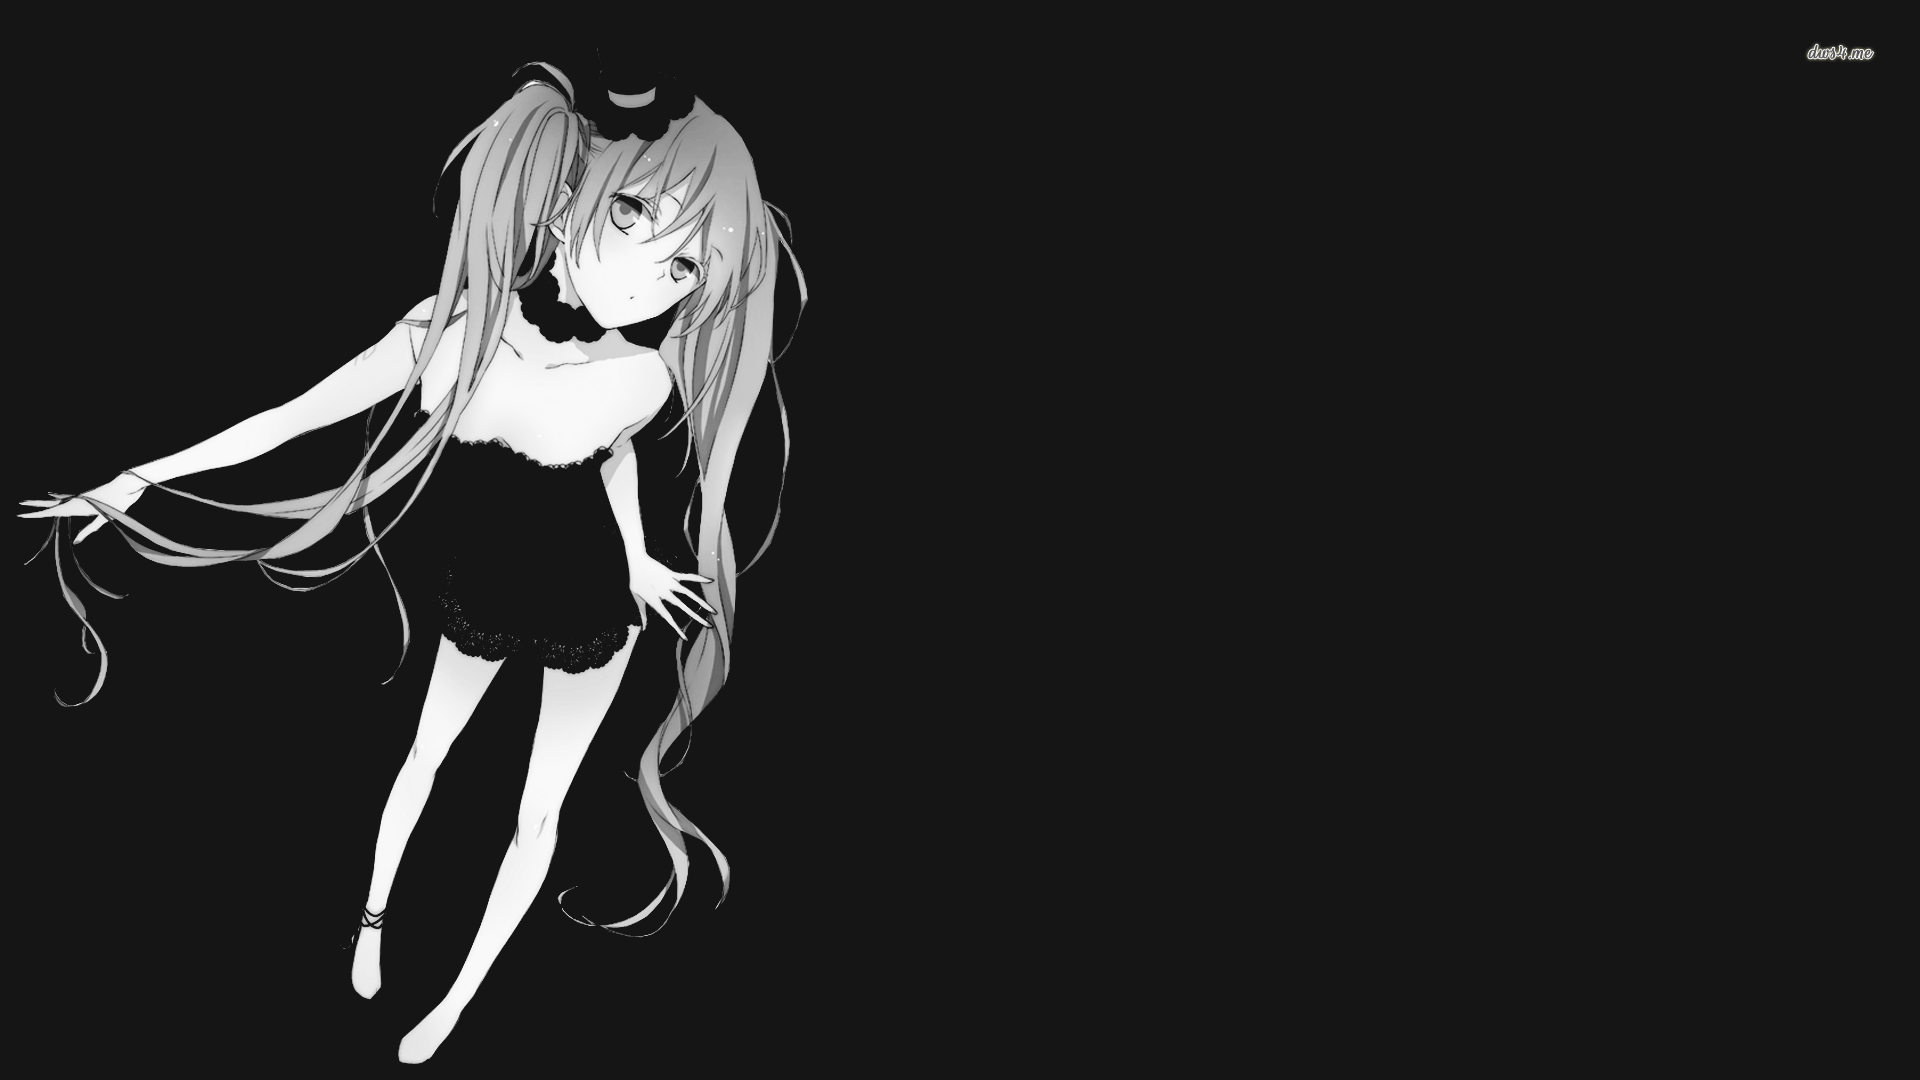 Black White Anime Wallpapers - Top Free Black White Anime Backgrounds - WallpaperAccess